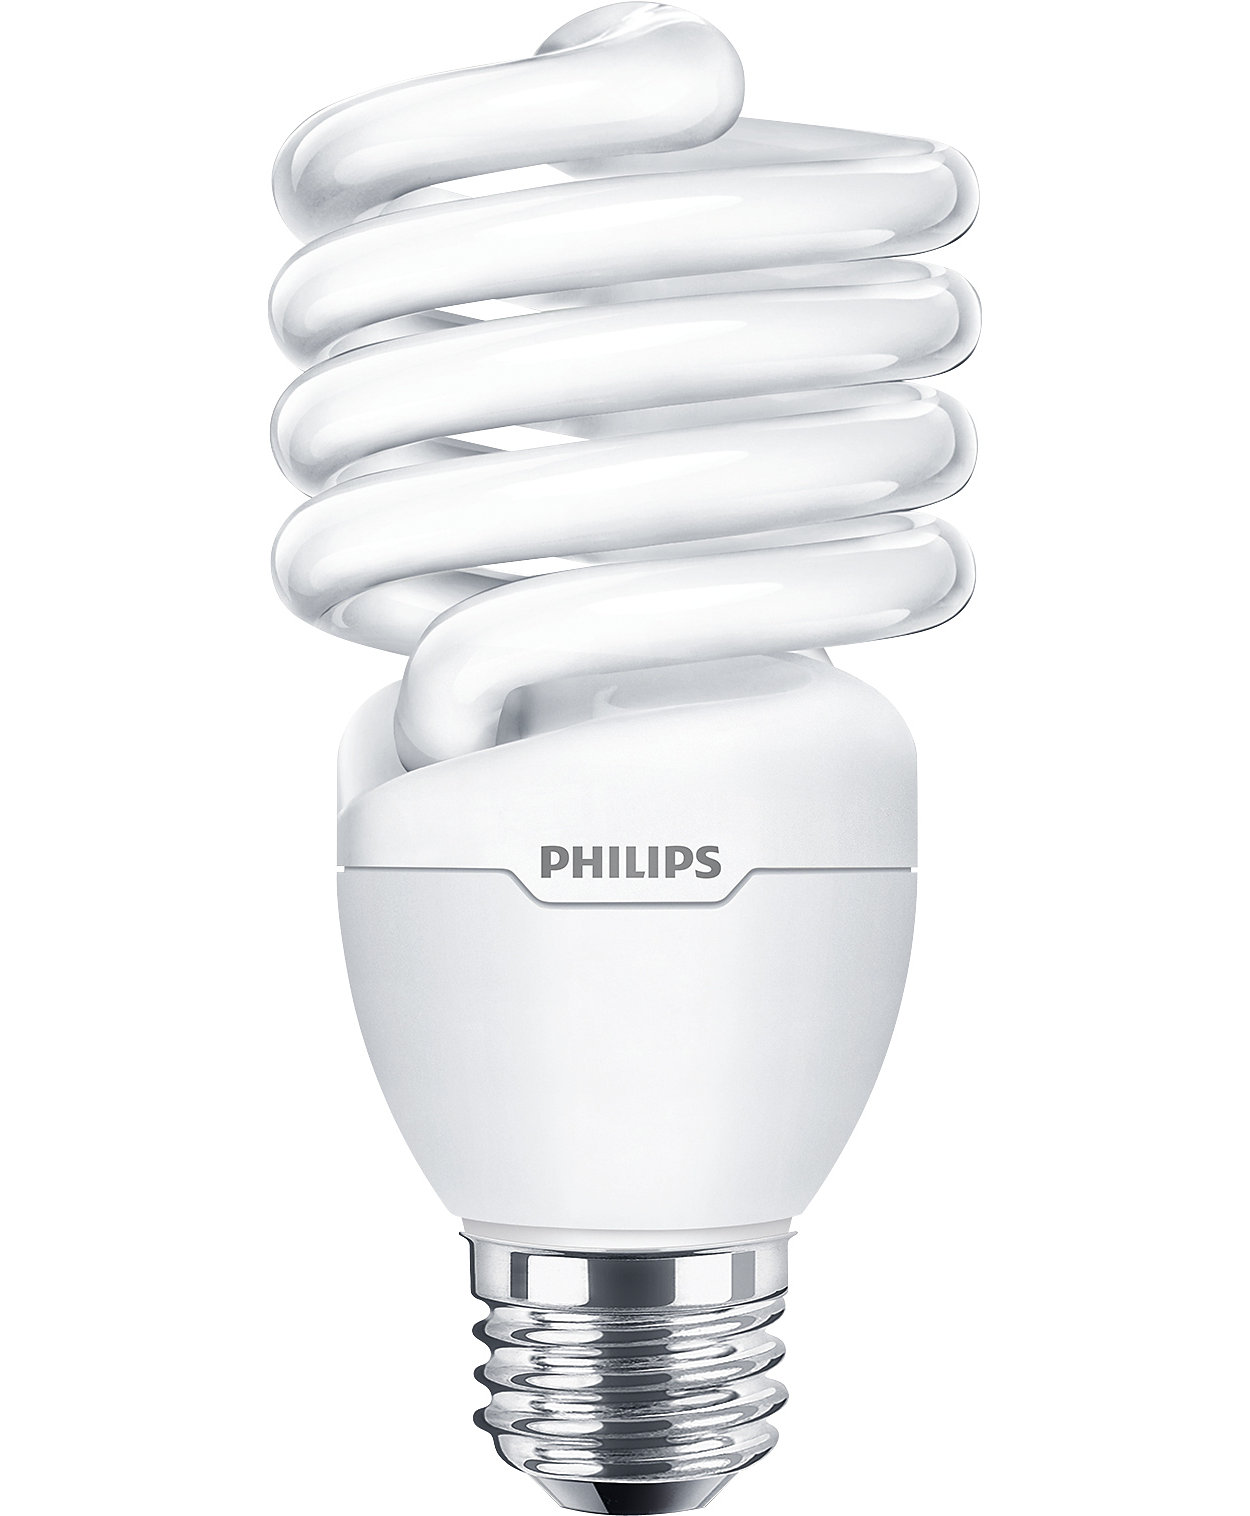 NOS Vintage Philips Earth Light SL 17/27 Energy Saving Bulb 60w 10000 Hours for sale online 